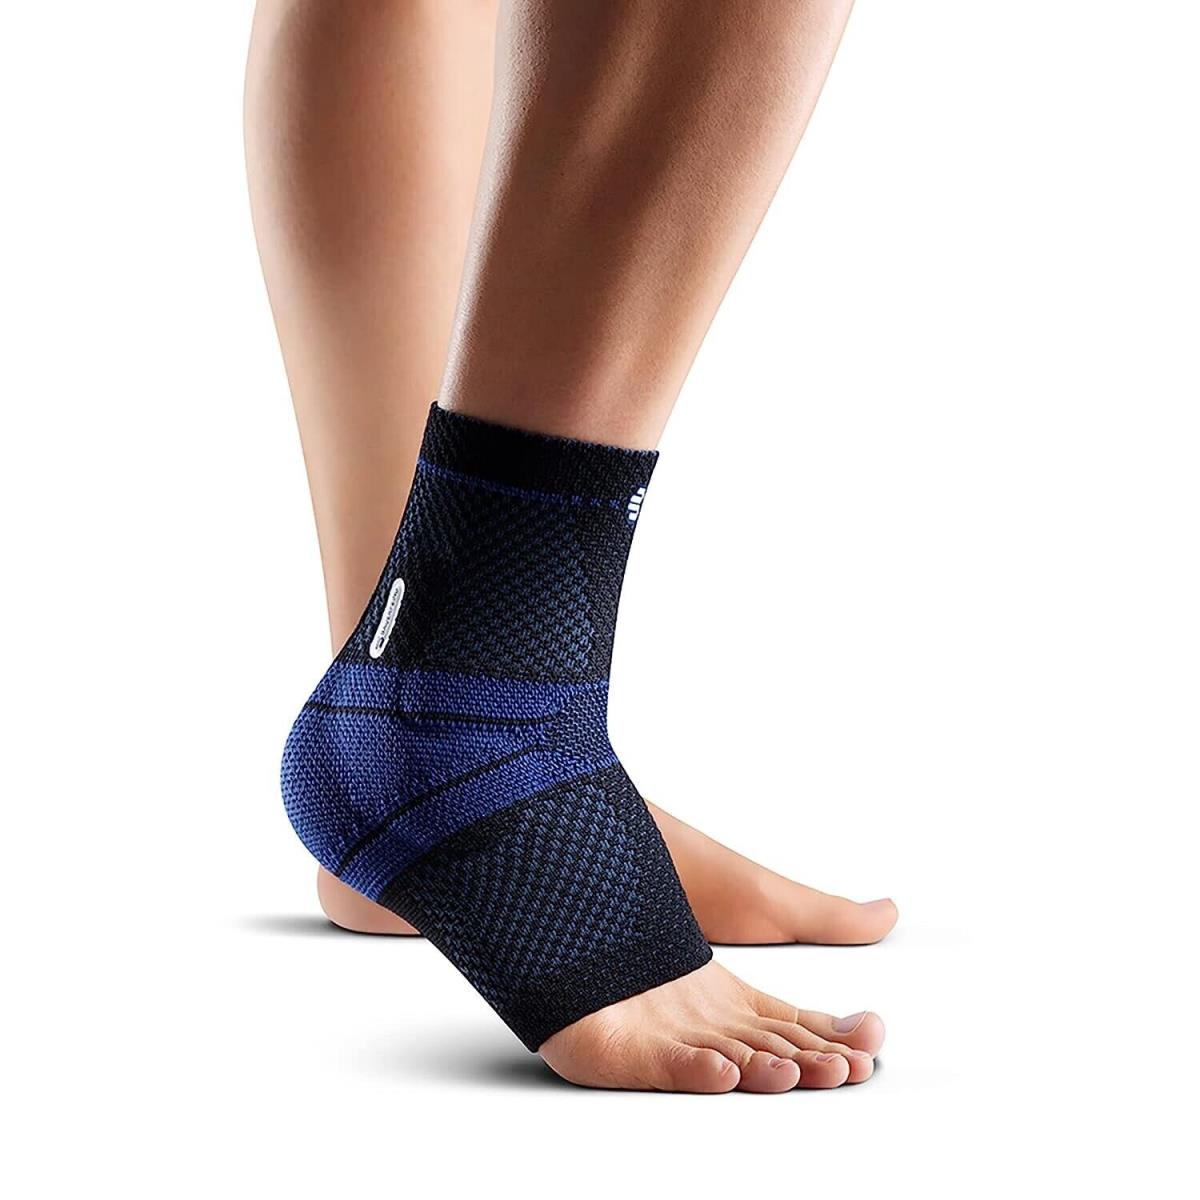 Bauerfeind Malleotrain Ankle Support Brace Reinforce Ankle Stabilityleft Size 5